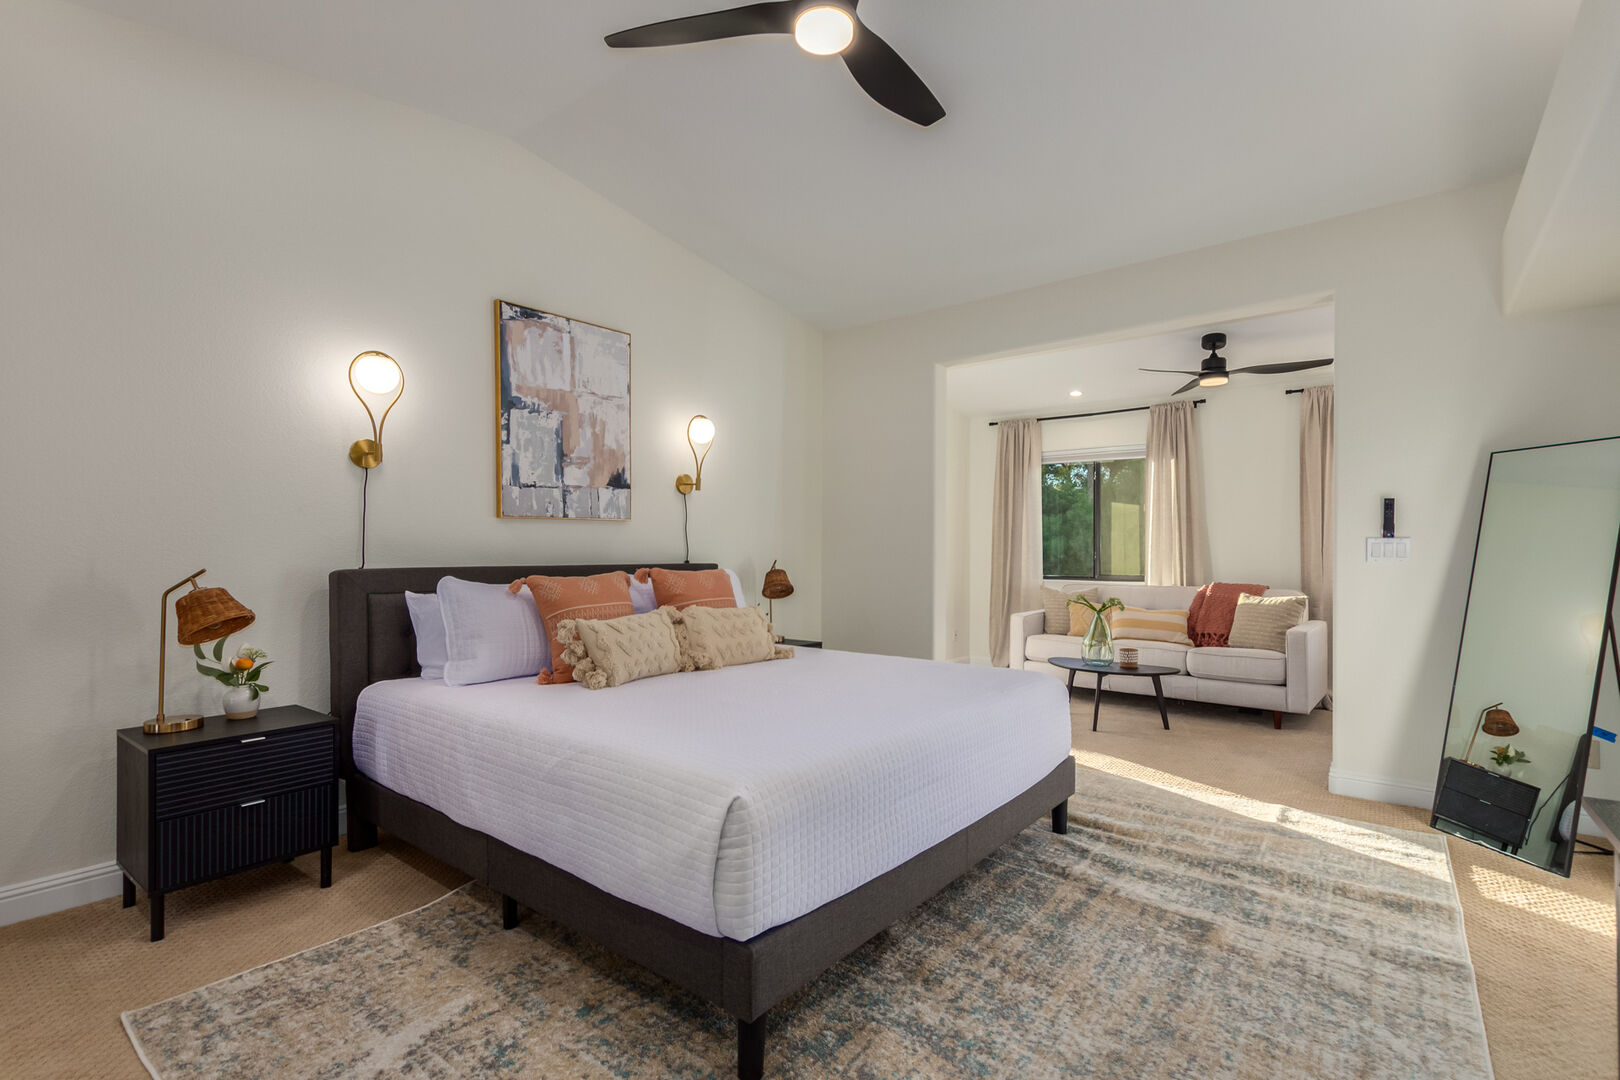 Relax with your private master bedroom and own amenities.